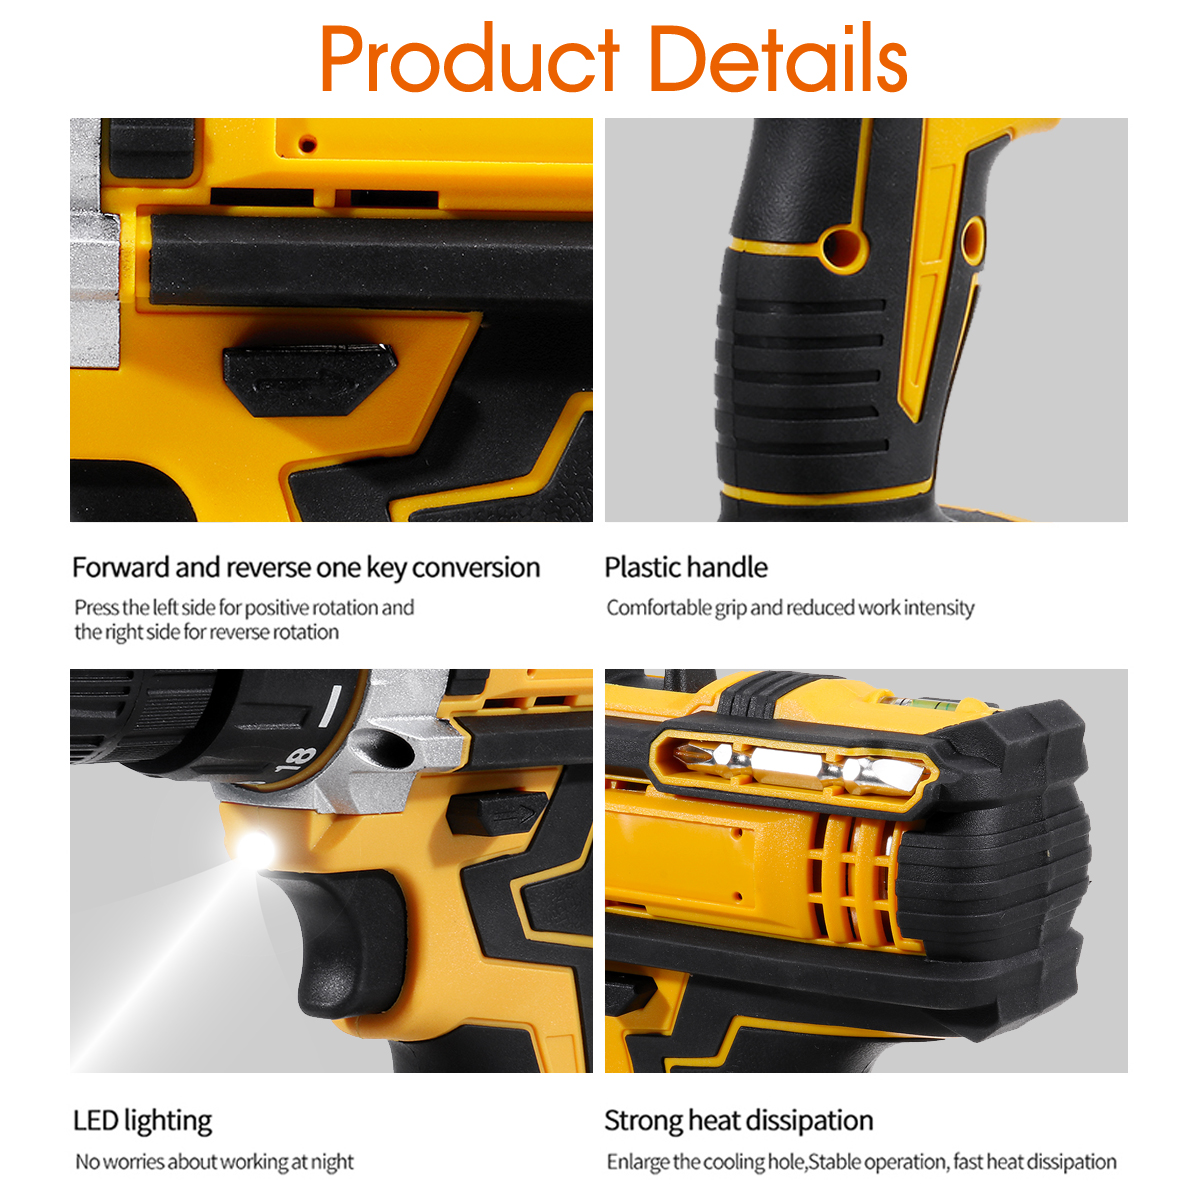 2000rpm-38Nm-21V-Lithium-Electric-Impact-Hammer-Drill-Wood-Drilling-Screwdrivers-with-Battery-1943471-7